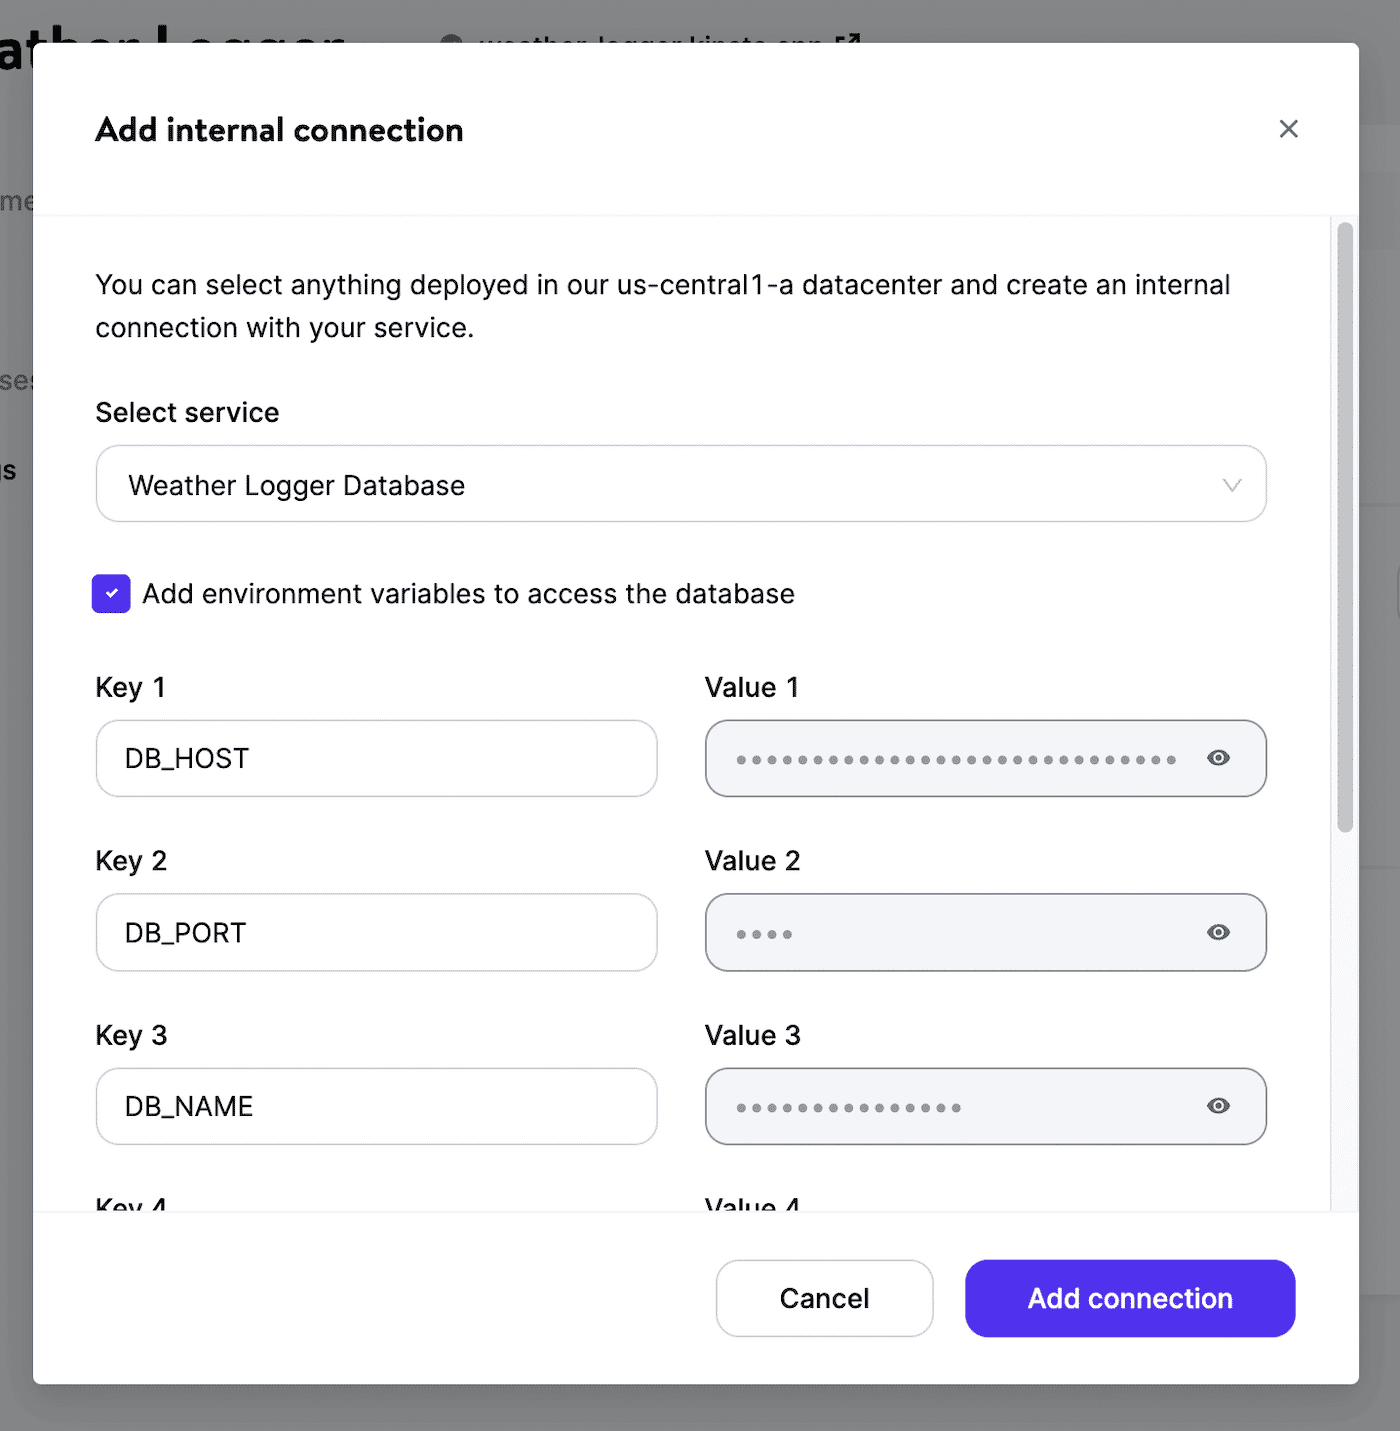 Add an internal connection for our example application.